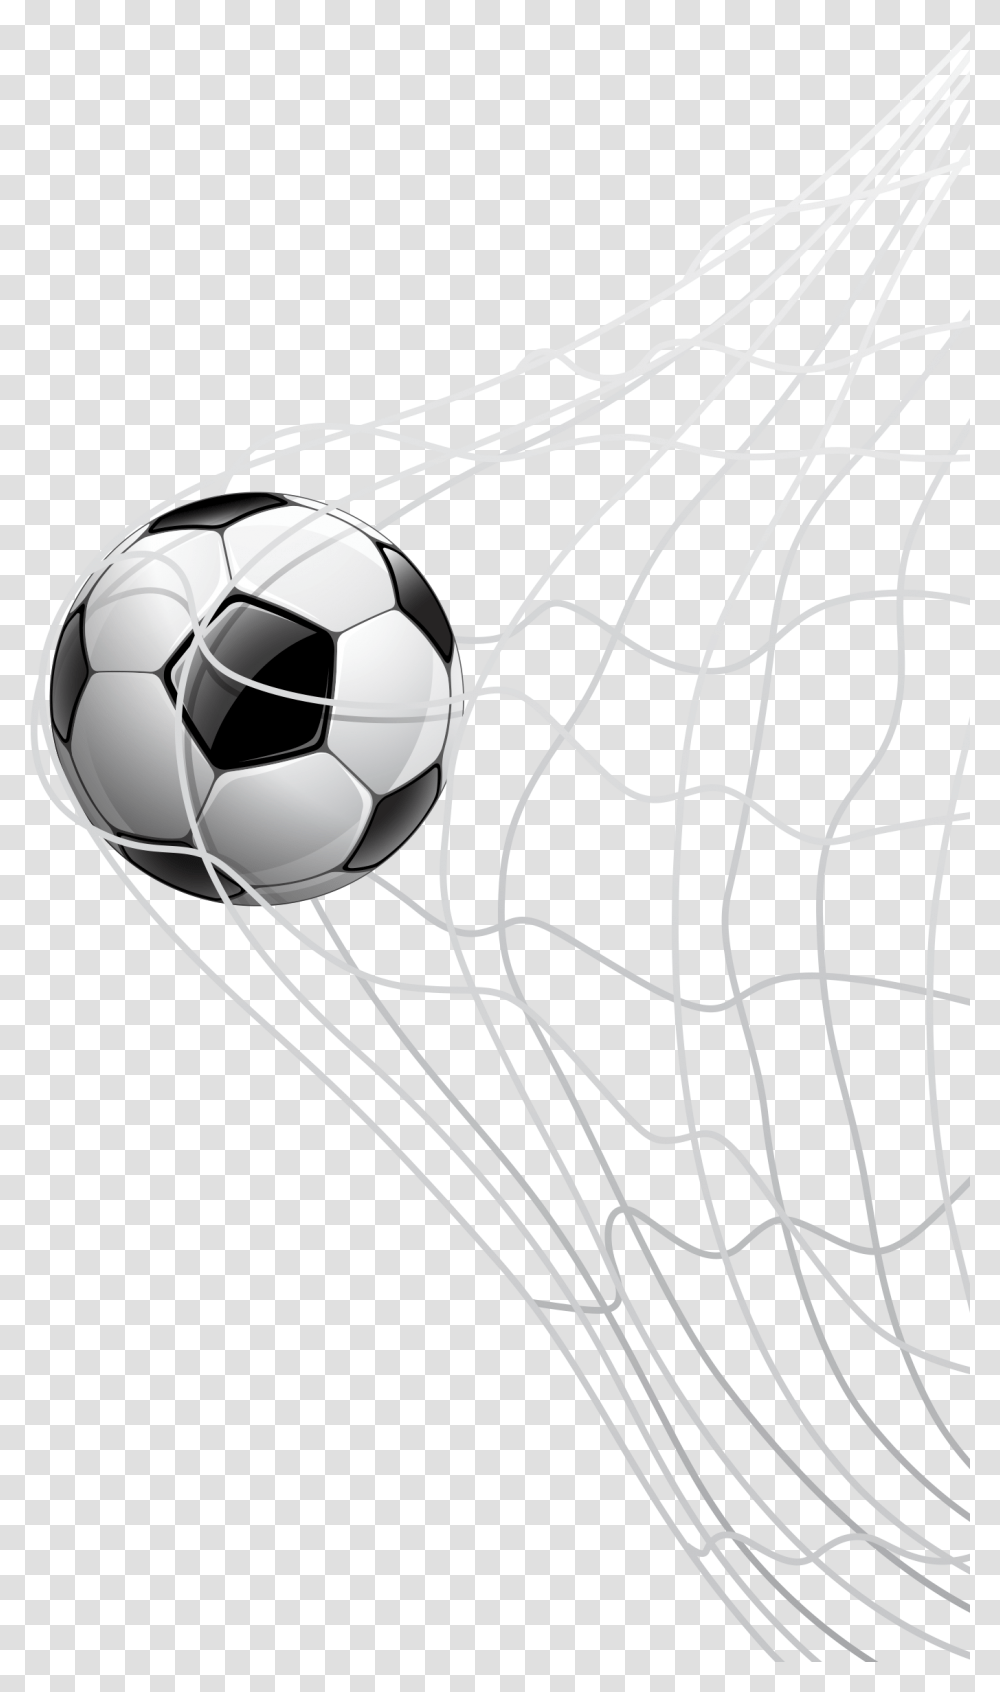 Soccer Images Collection For Free Football Ball, Soccer Ball, Team Sport, Sports, Spider Web Transparent Png